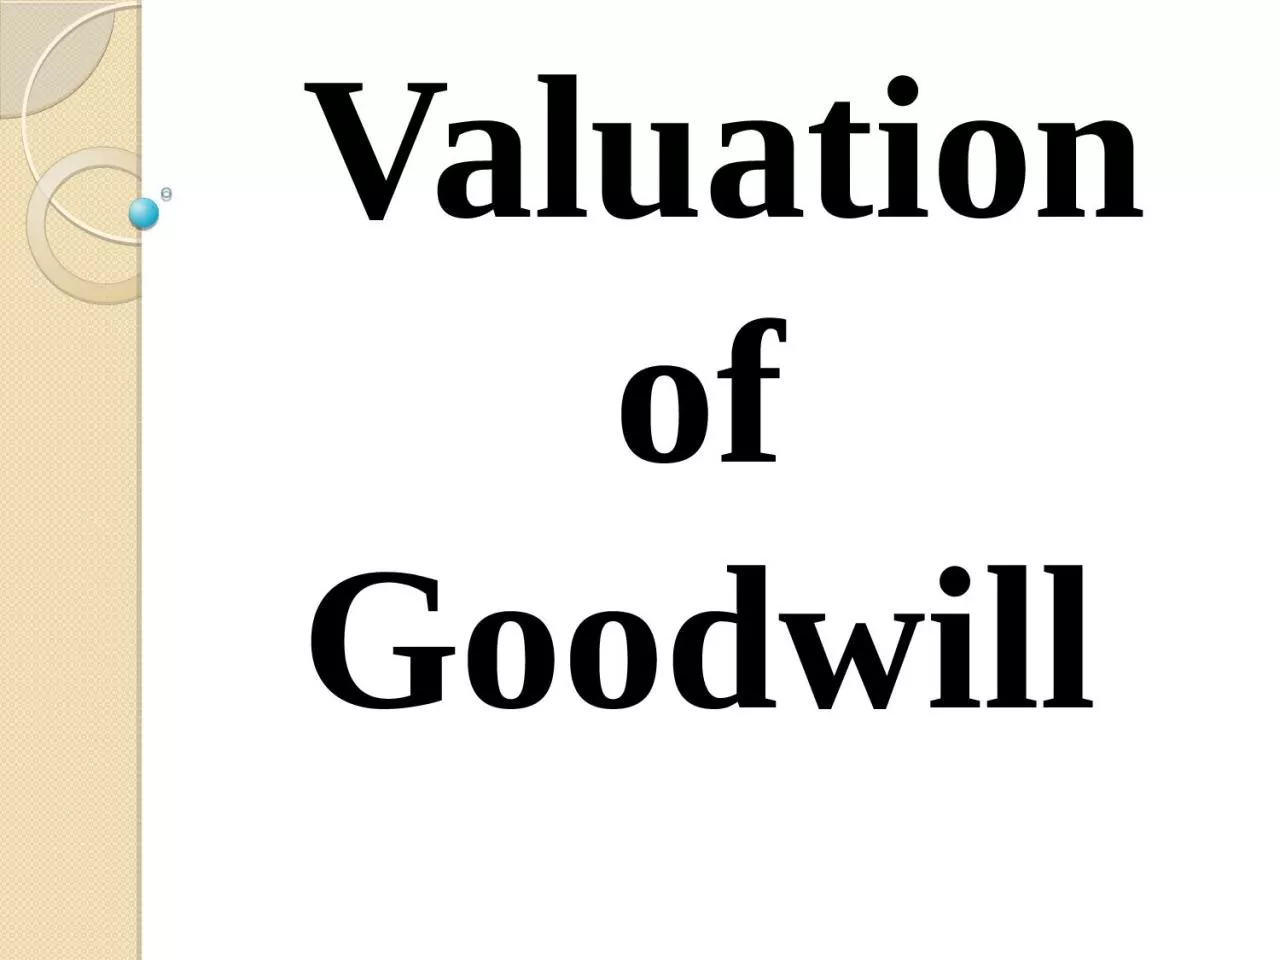 Valuation of Goodwill Introduction